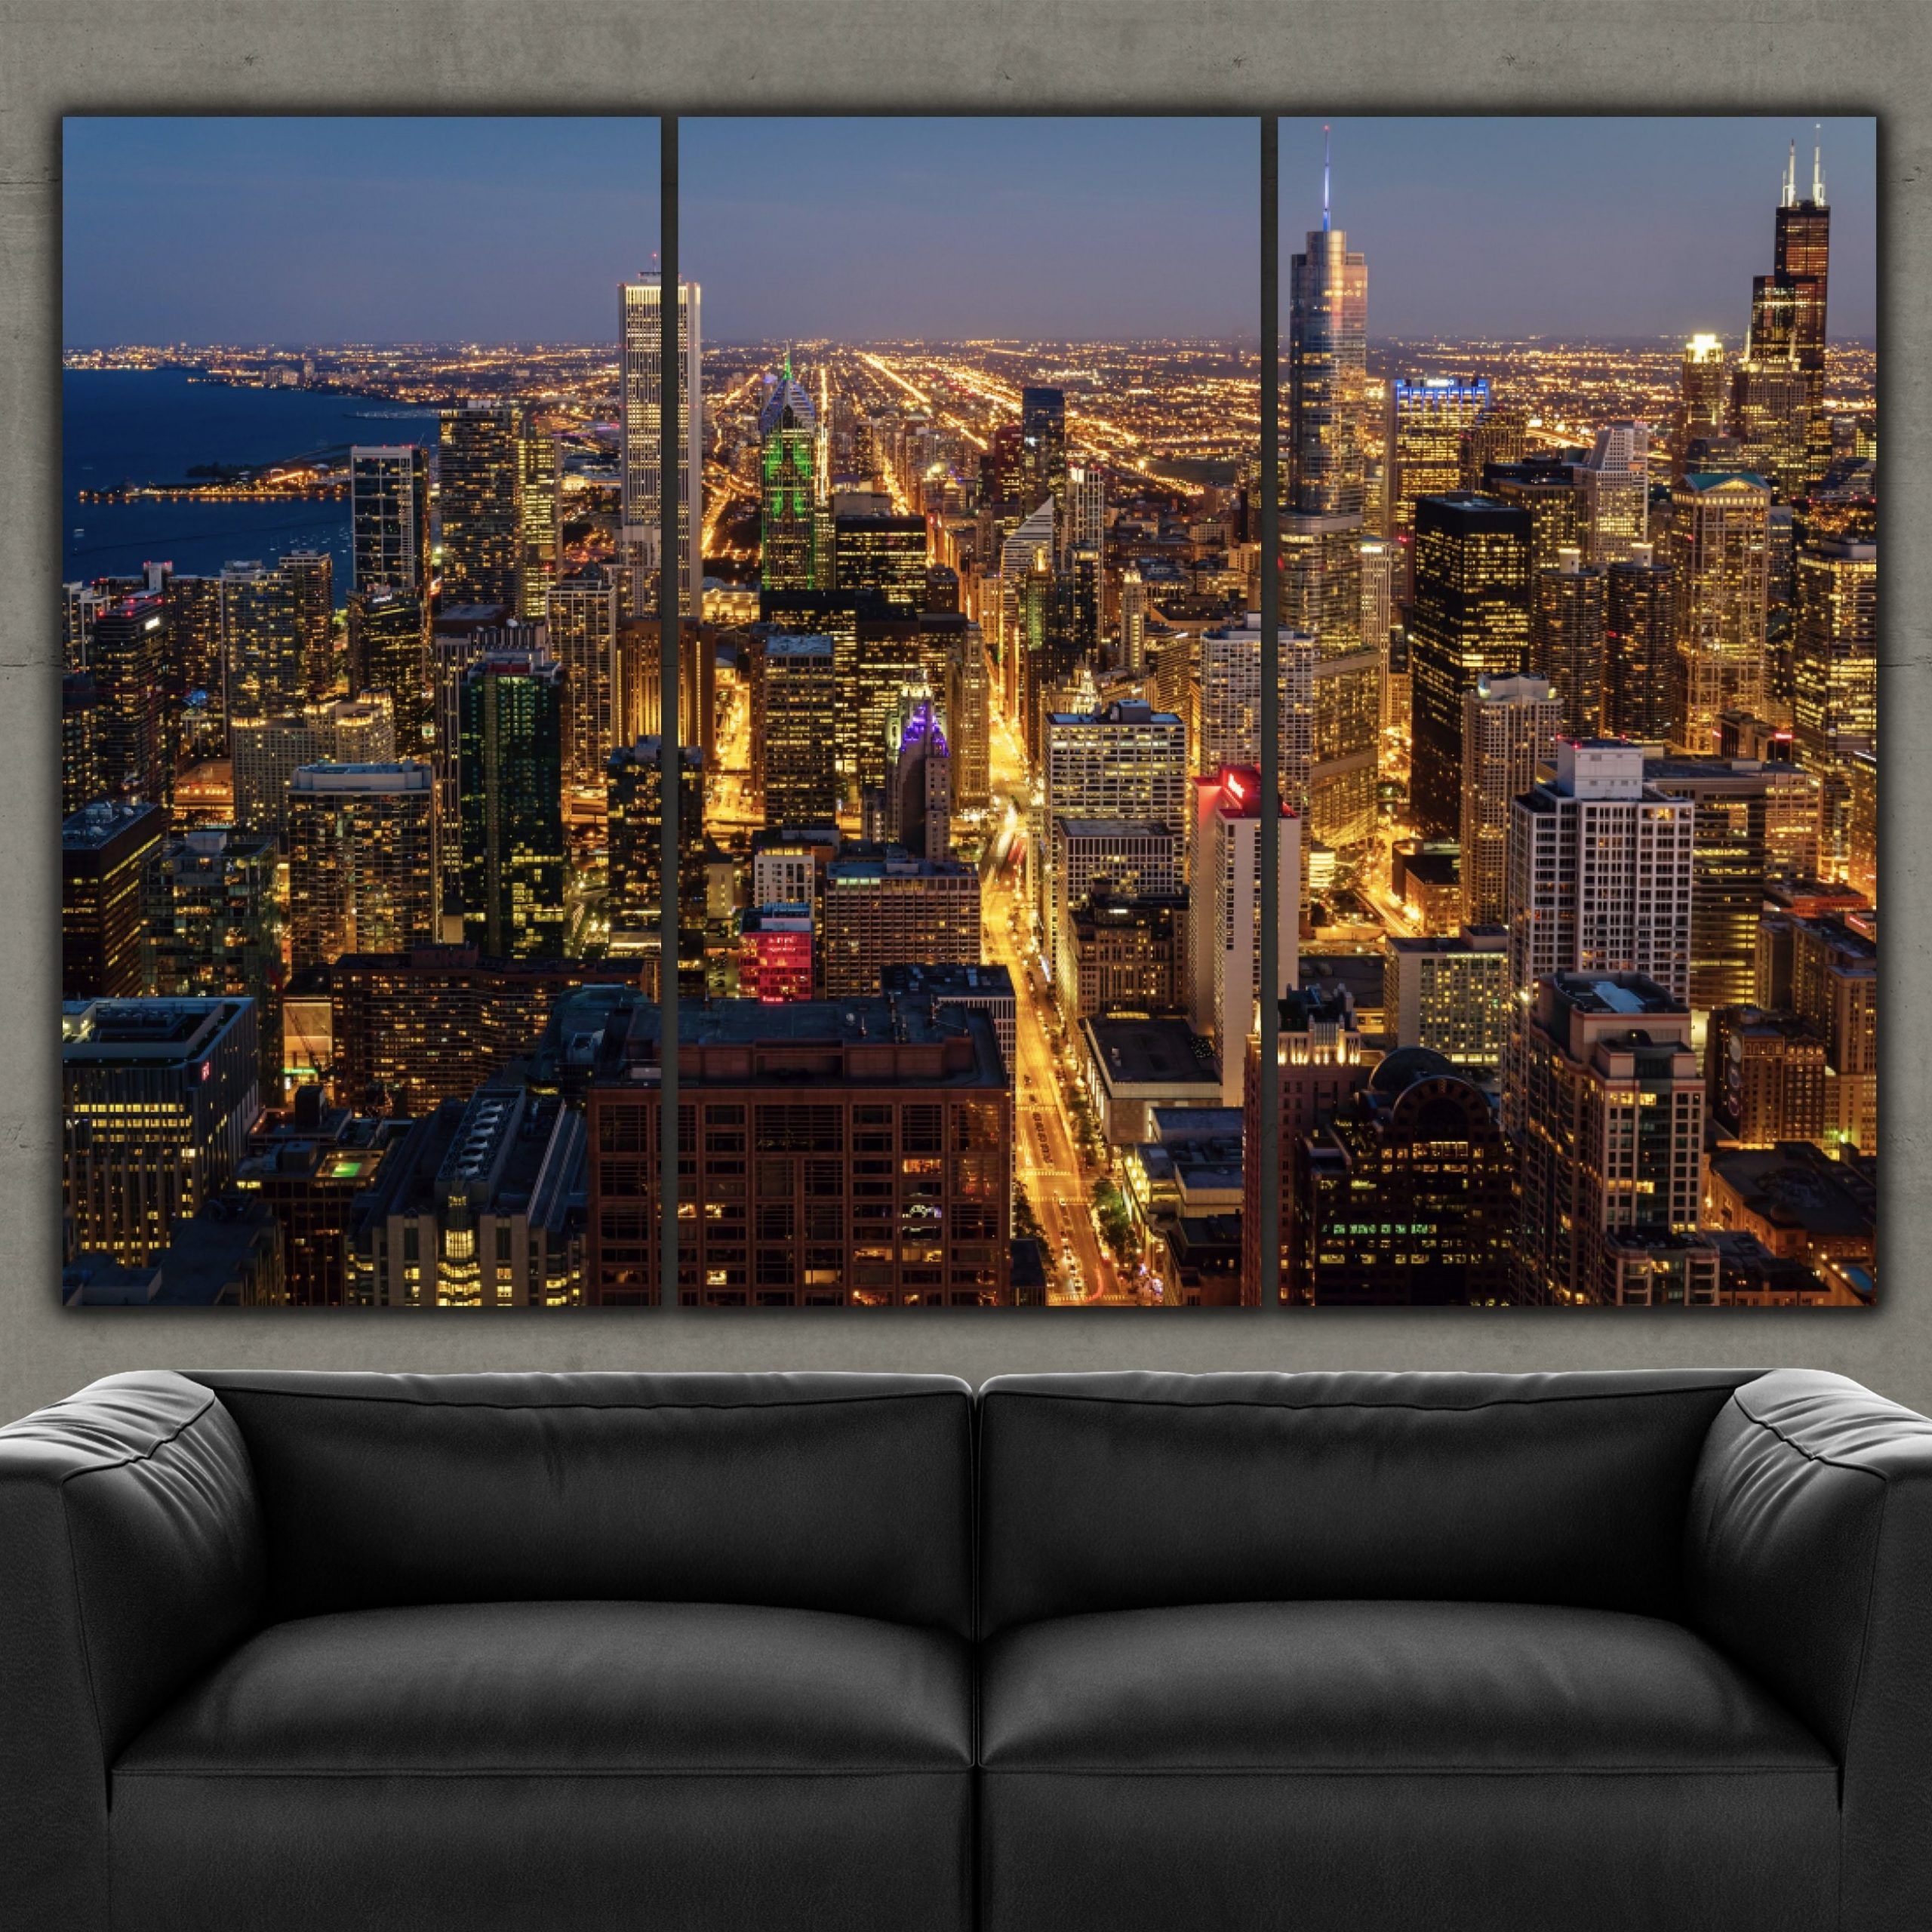 Chicago Skyline Mag Mile Large Wall Art Chicago At Night – Etsy With Night Wall Art (View 6 of 15)